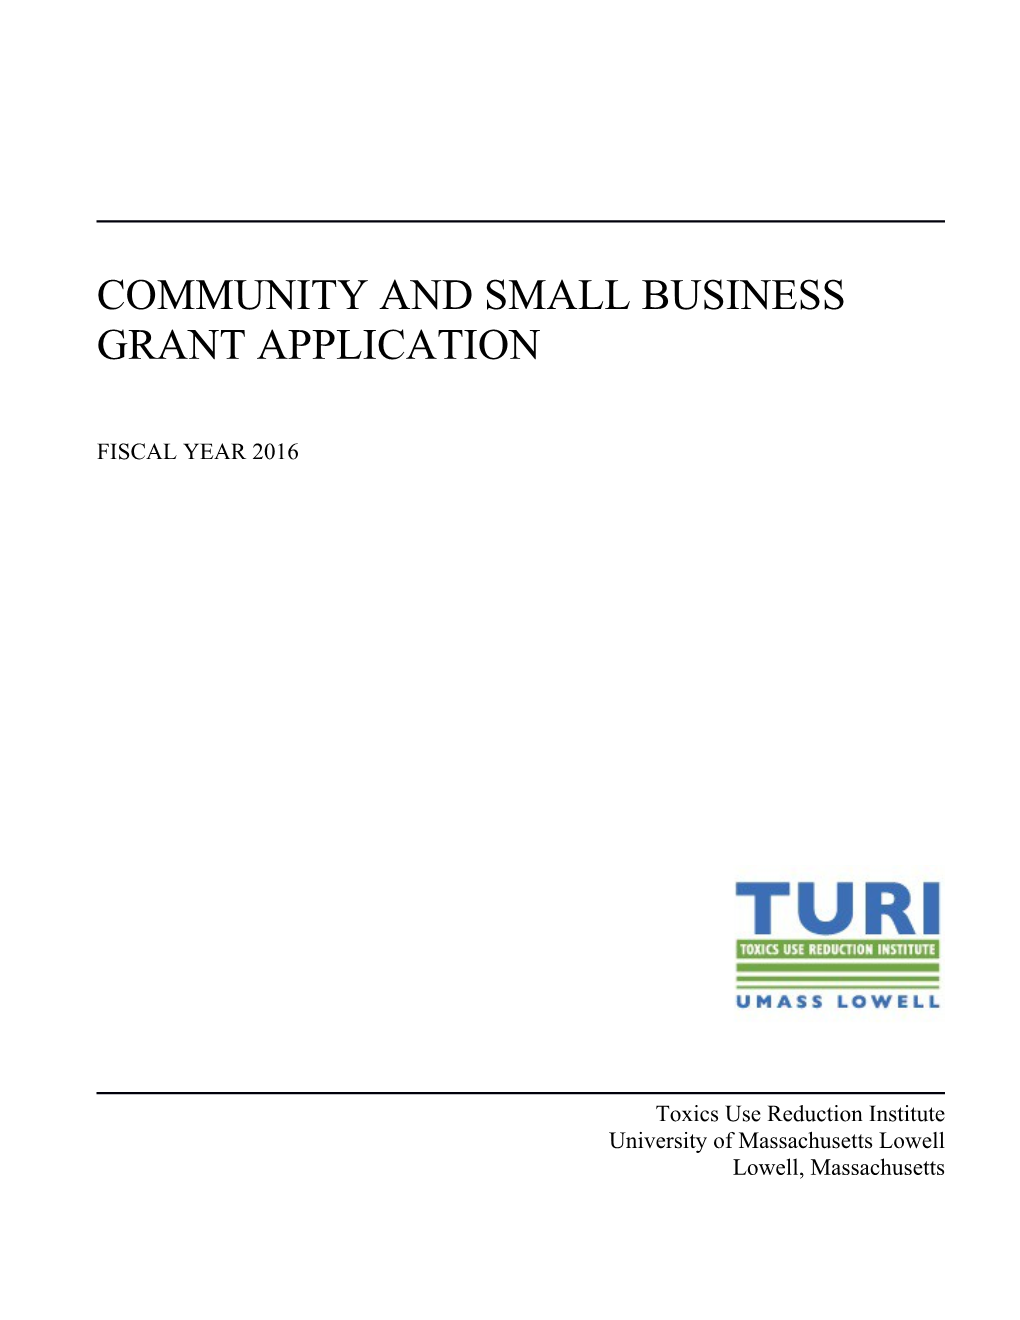 Toxics Use Reduction Networking (Turn) Grant Program Application